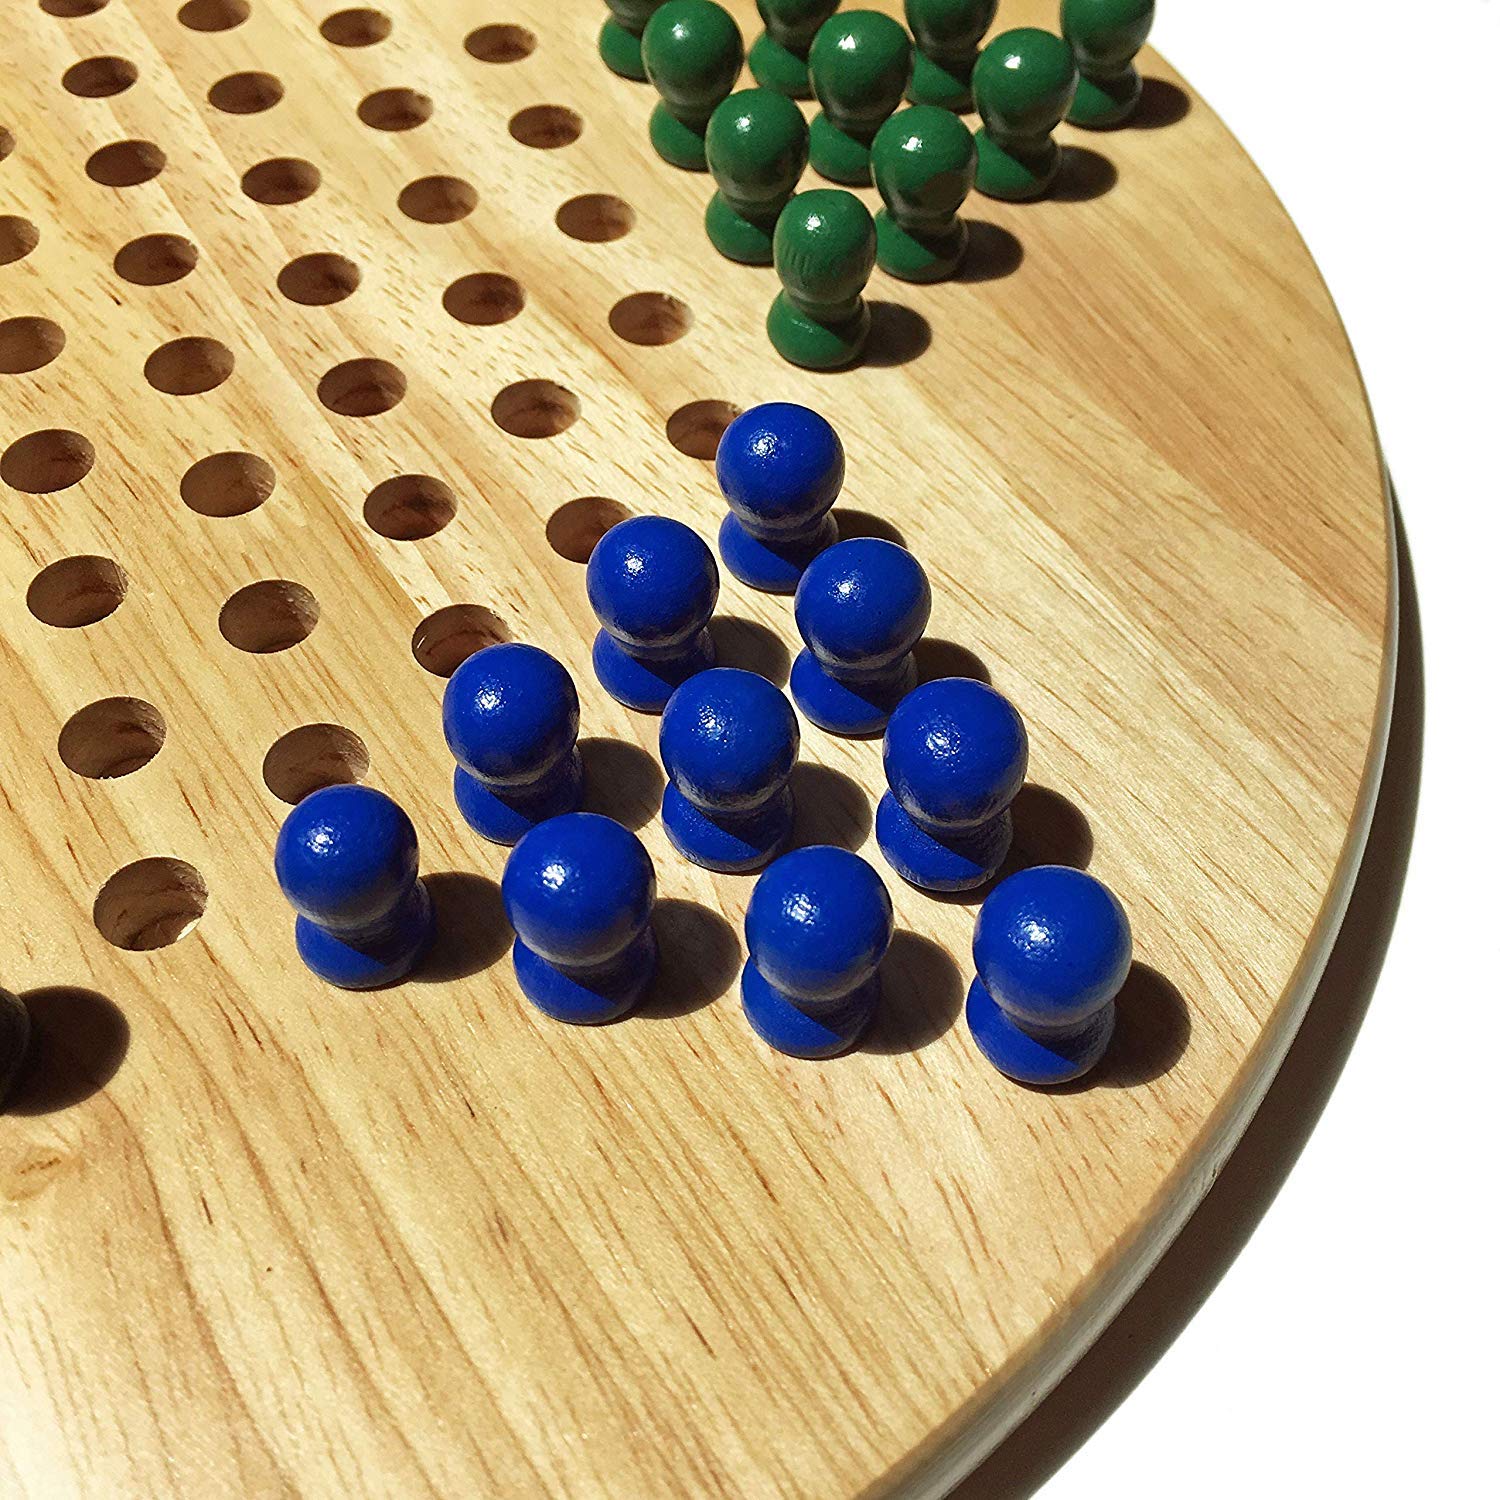 WE Games Solid Wood Chinese Checkers Board Game with Pegs- 11.5 in.